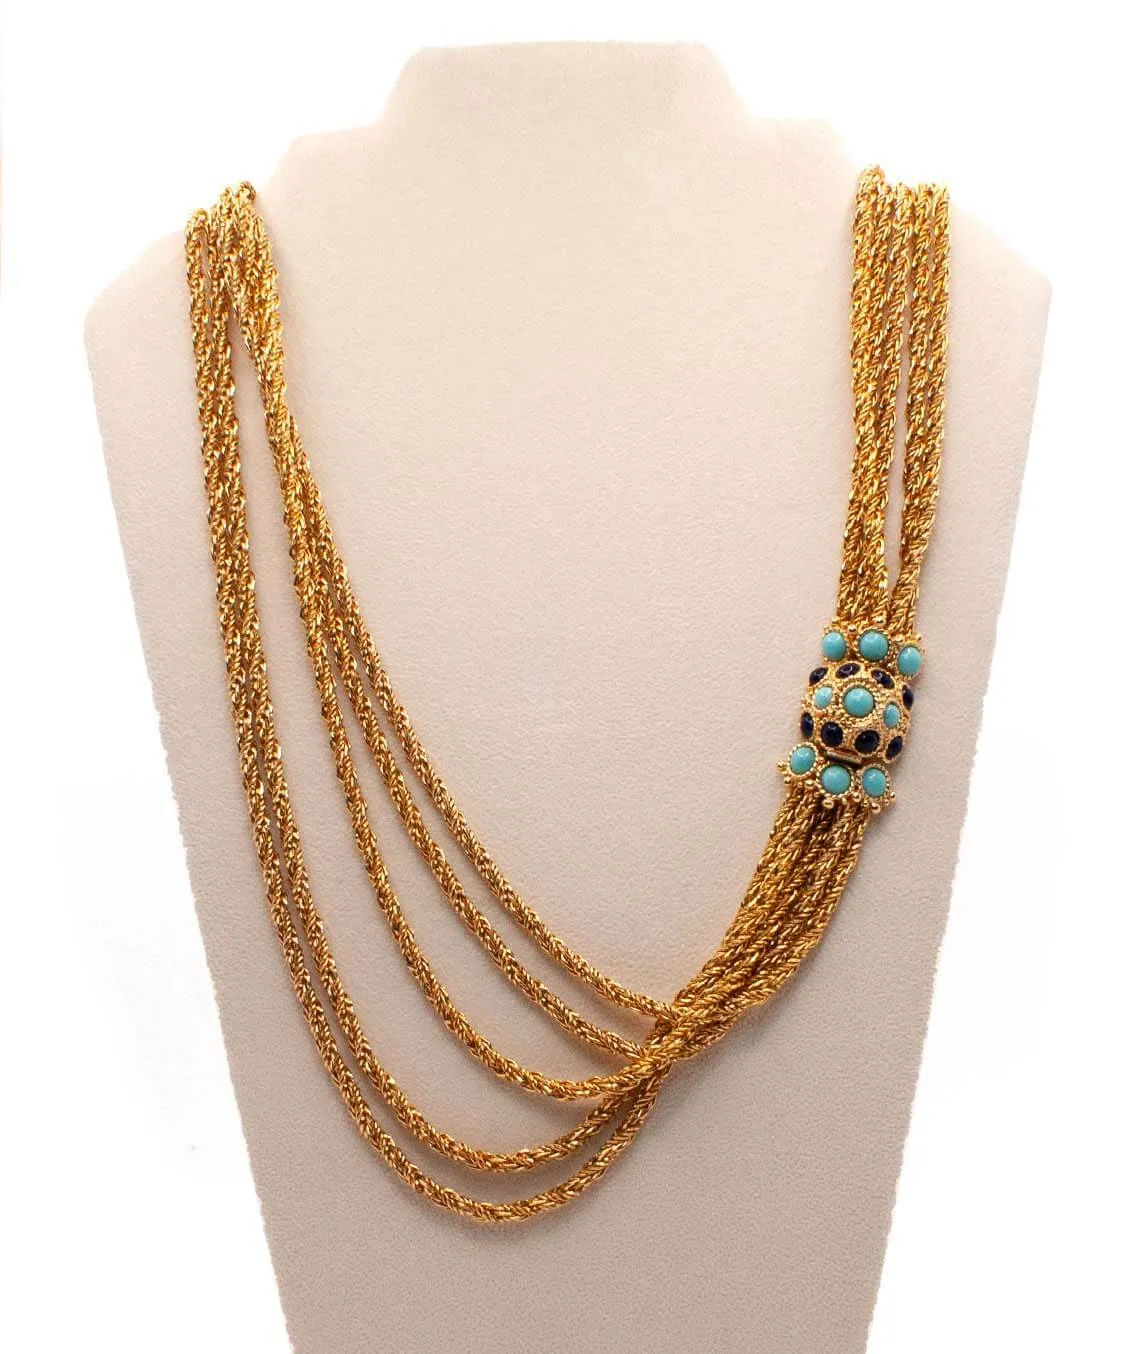 Christian Dior chain necklace with turquoise and blue glass decorative clasp on a beige velvet display stand